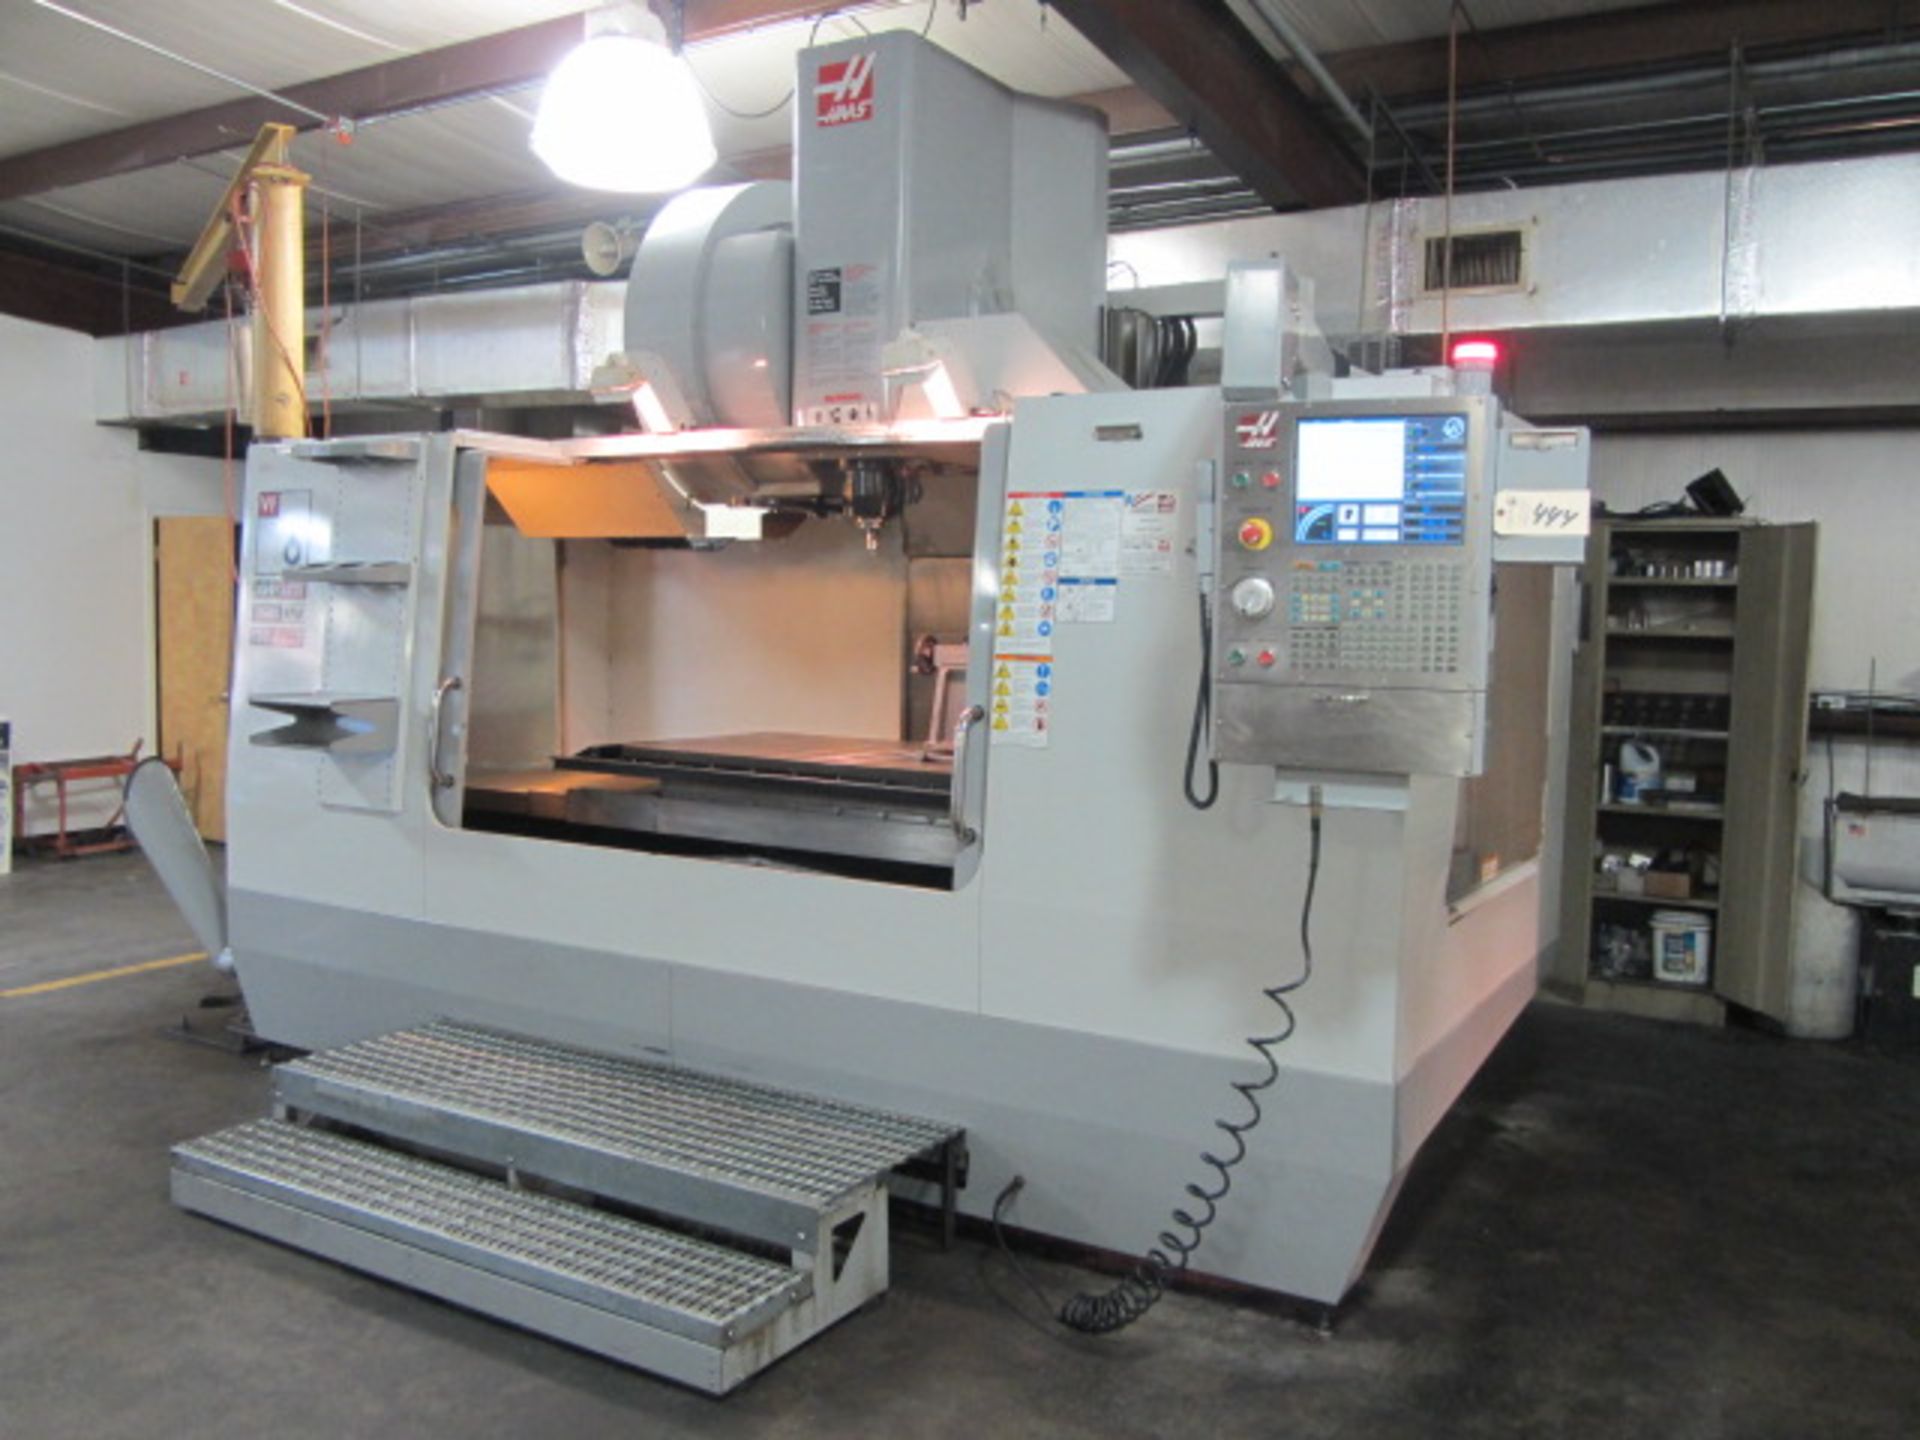 Haas Model VF-6/50 CNC Vertical Machining Center with 28'' x 64'' Table, 64'' X-Axis, 32'' Y-Axis, - Image 7 of 7